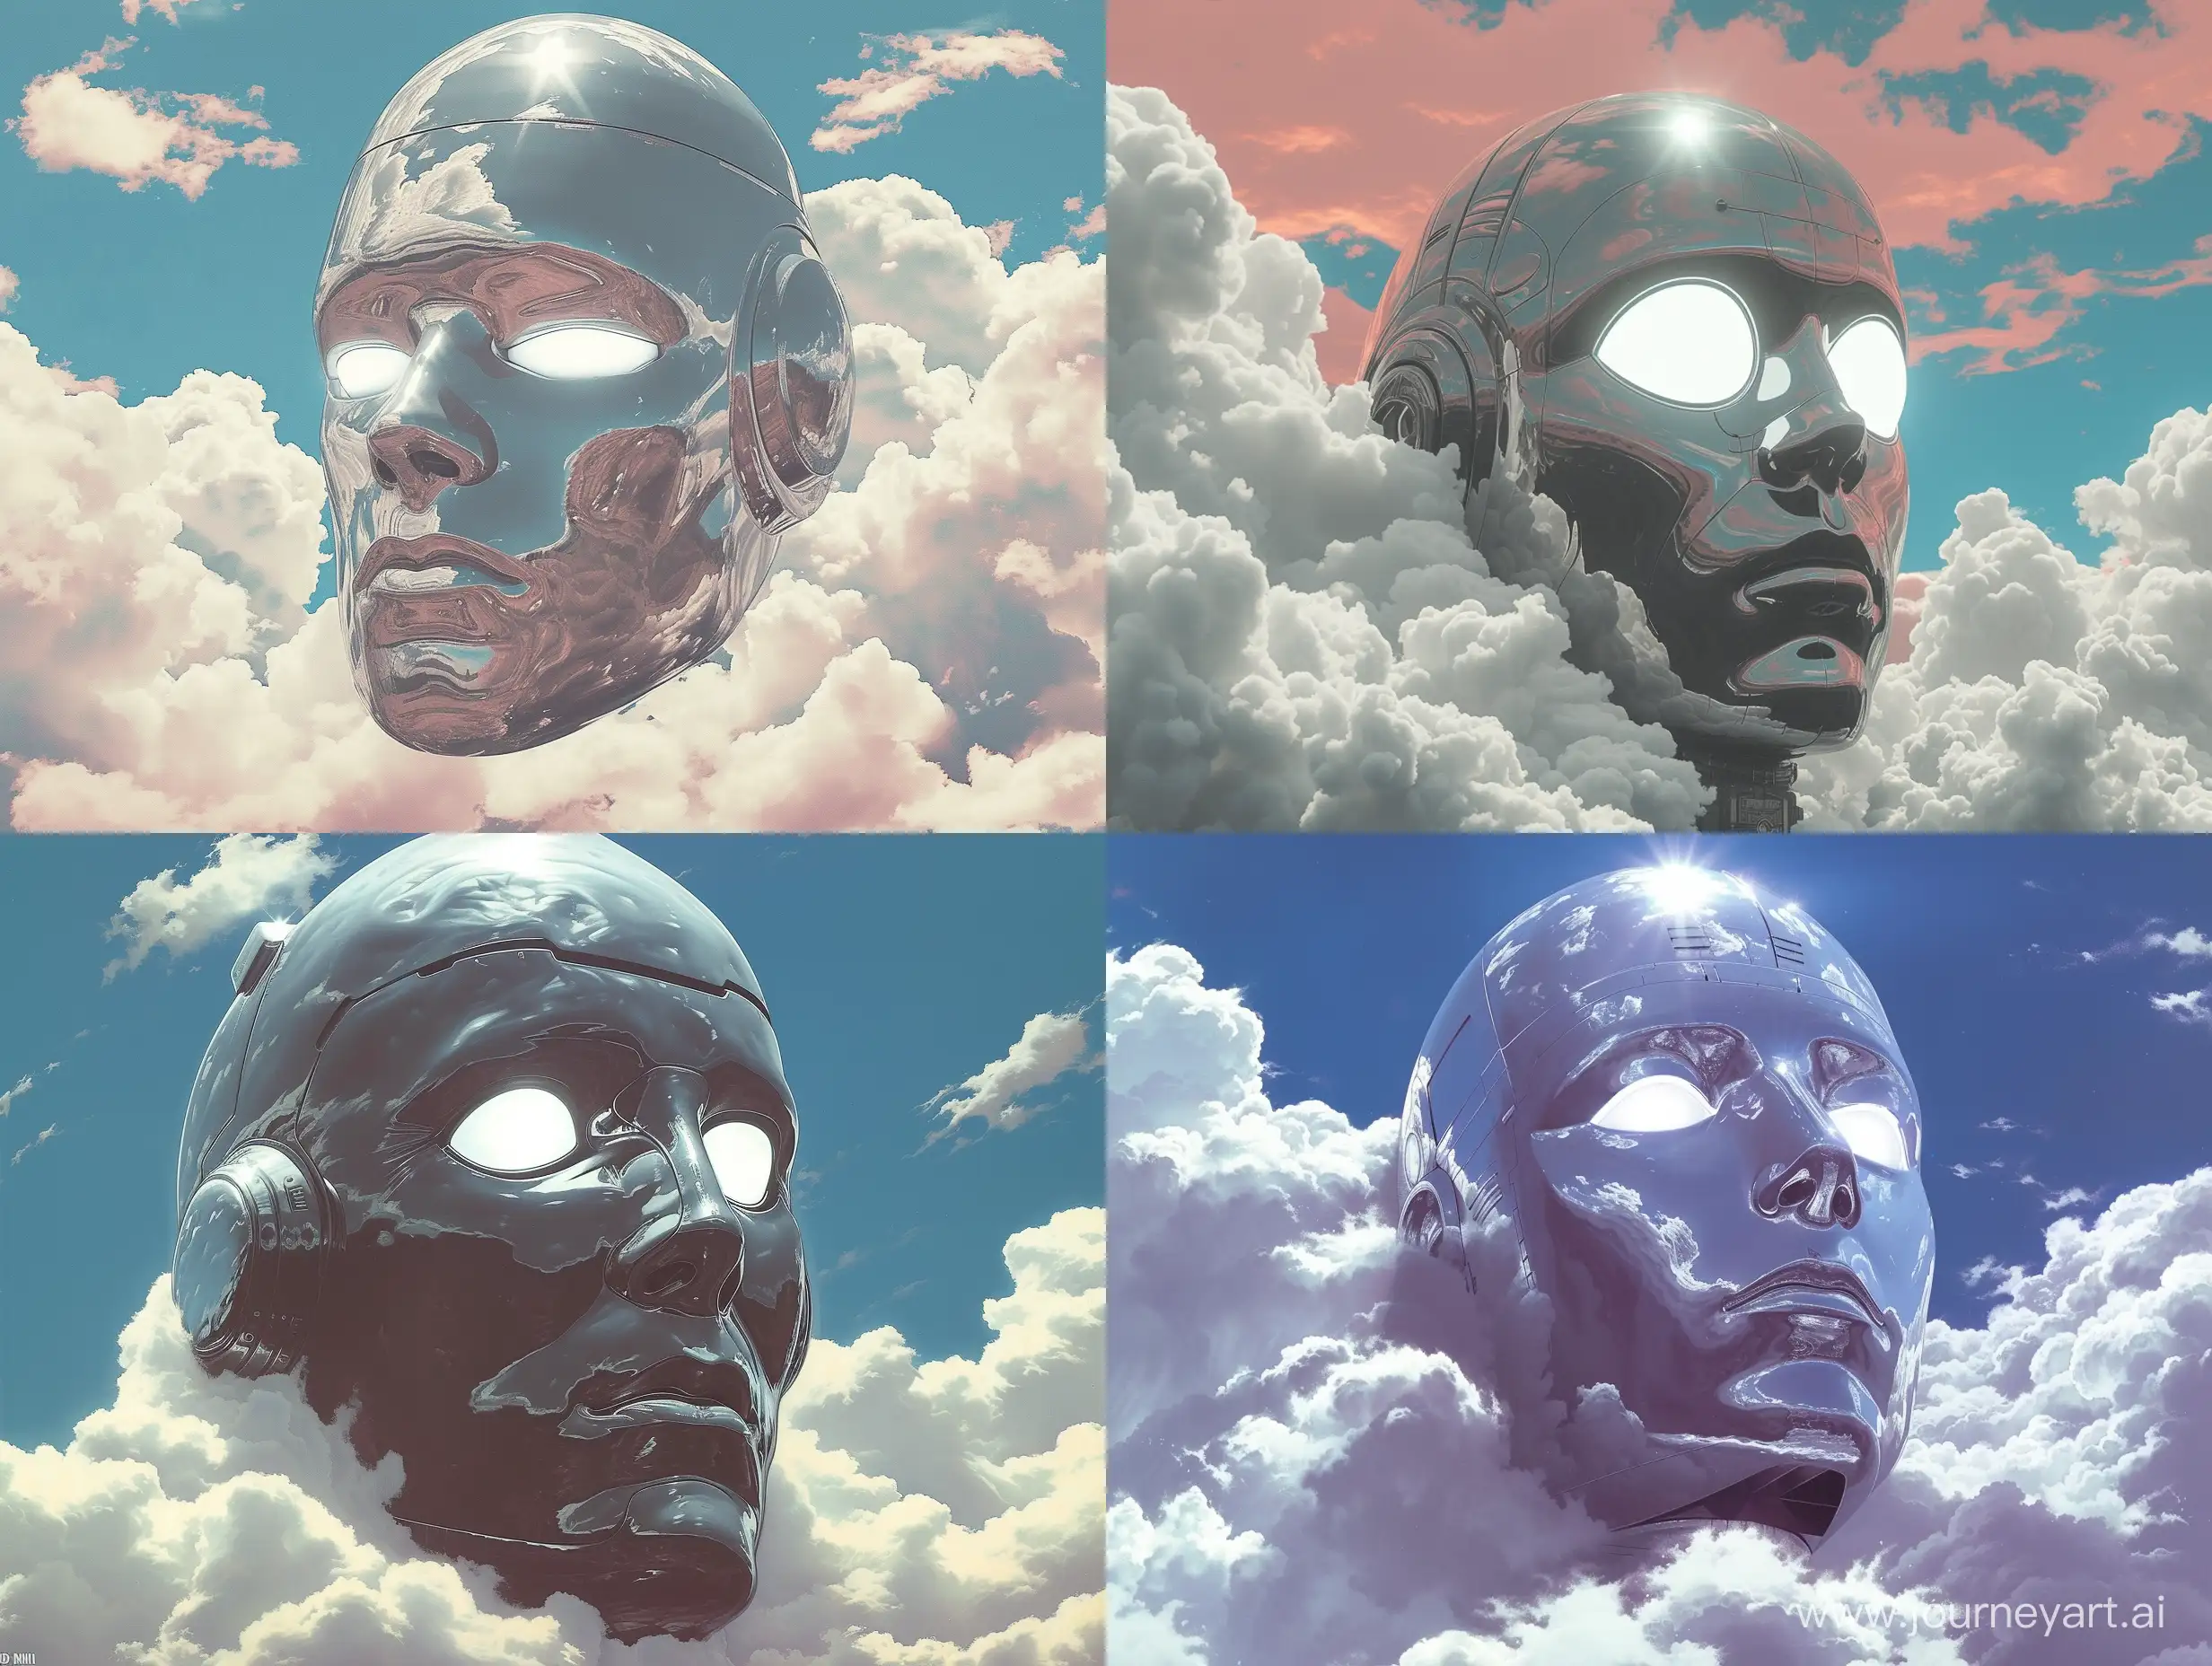 A giant silver head in the clouds, white glowing eyes, artwork drawn by Syd Mead. This chill synthwave artwork poster has a retro 70s and 80s vintage aesthetic with surrealism. It also features artwork by Hiroshi Nagaim and Robert McCall, evoking a nostalgic feeling with its vintage poster and nostalgic colors, day time
